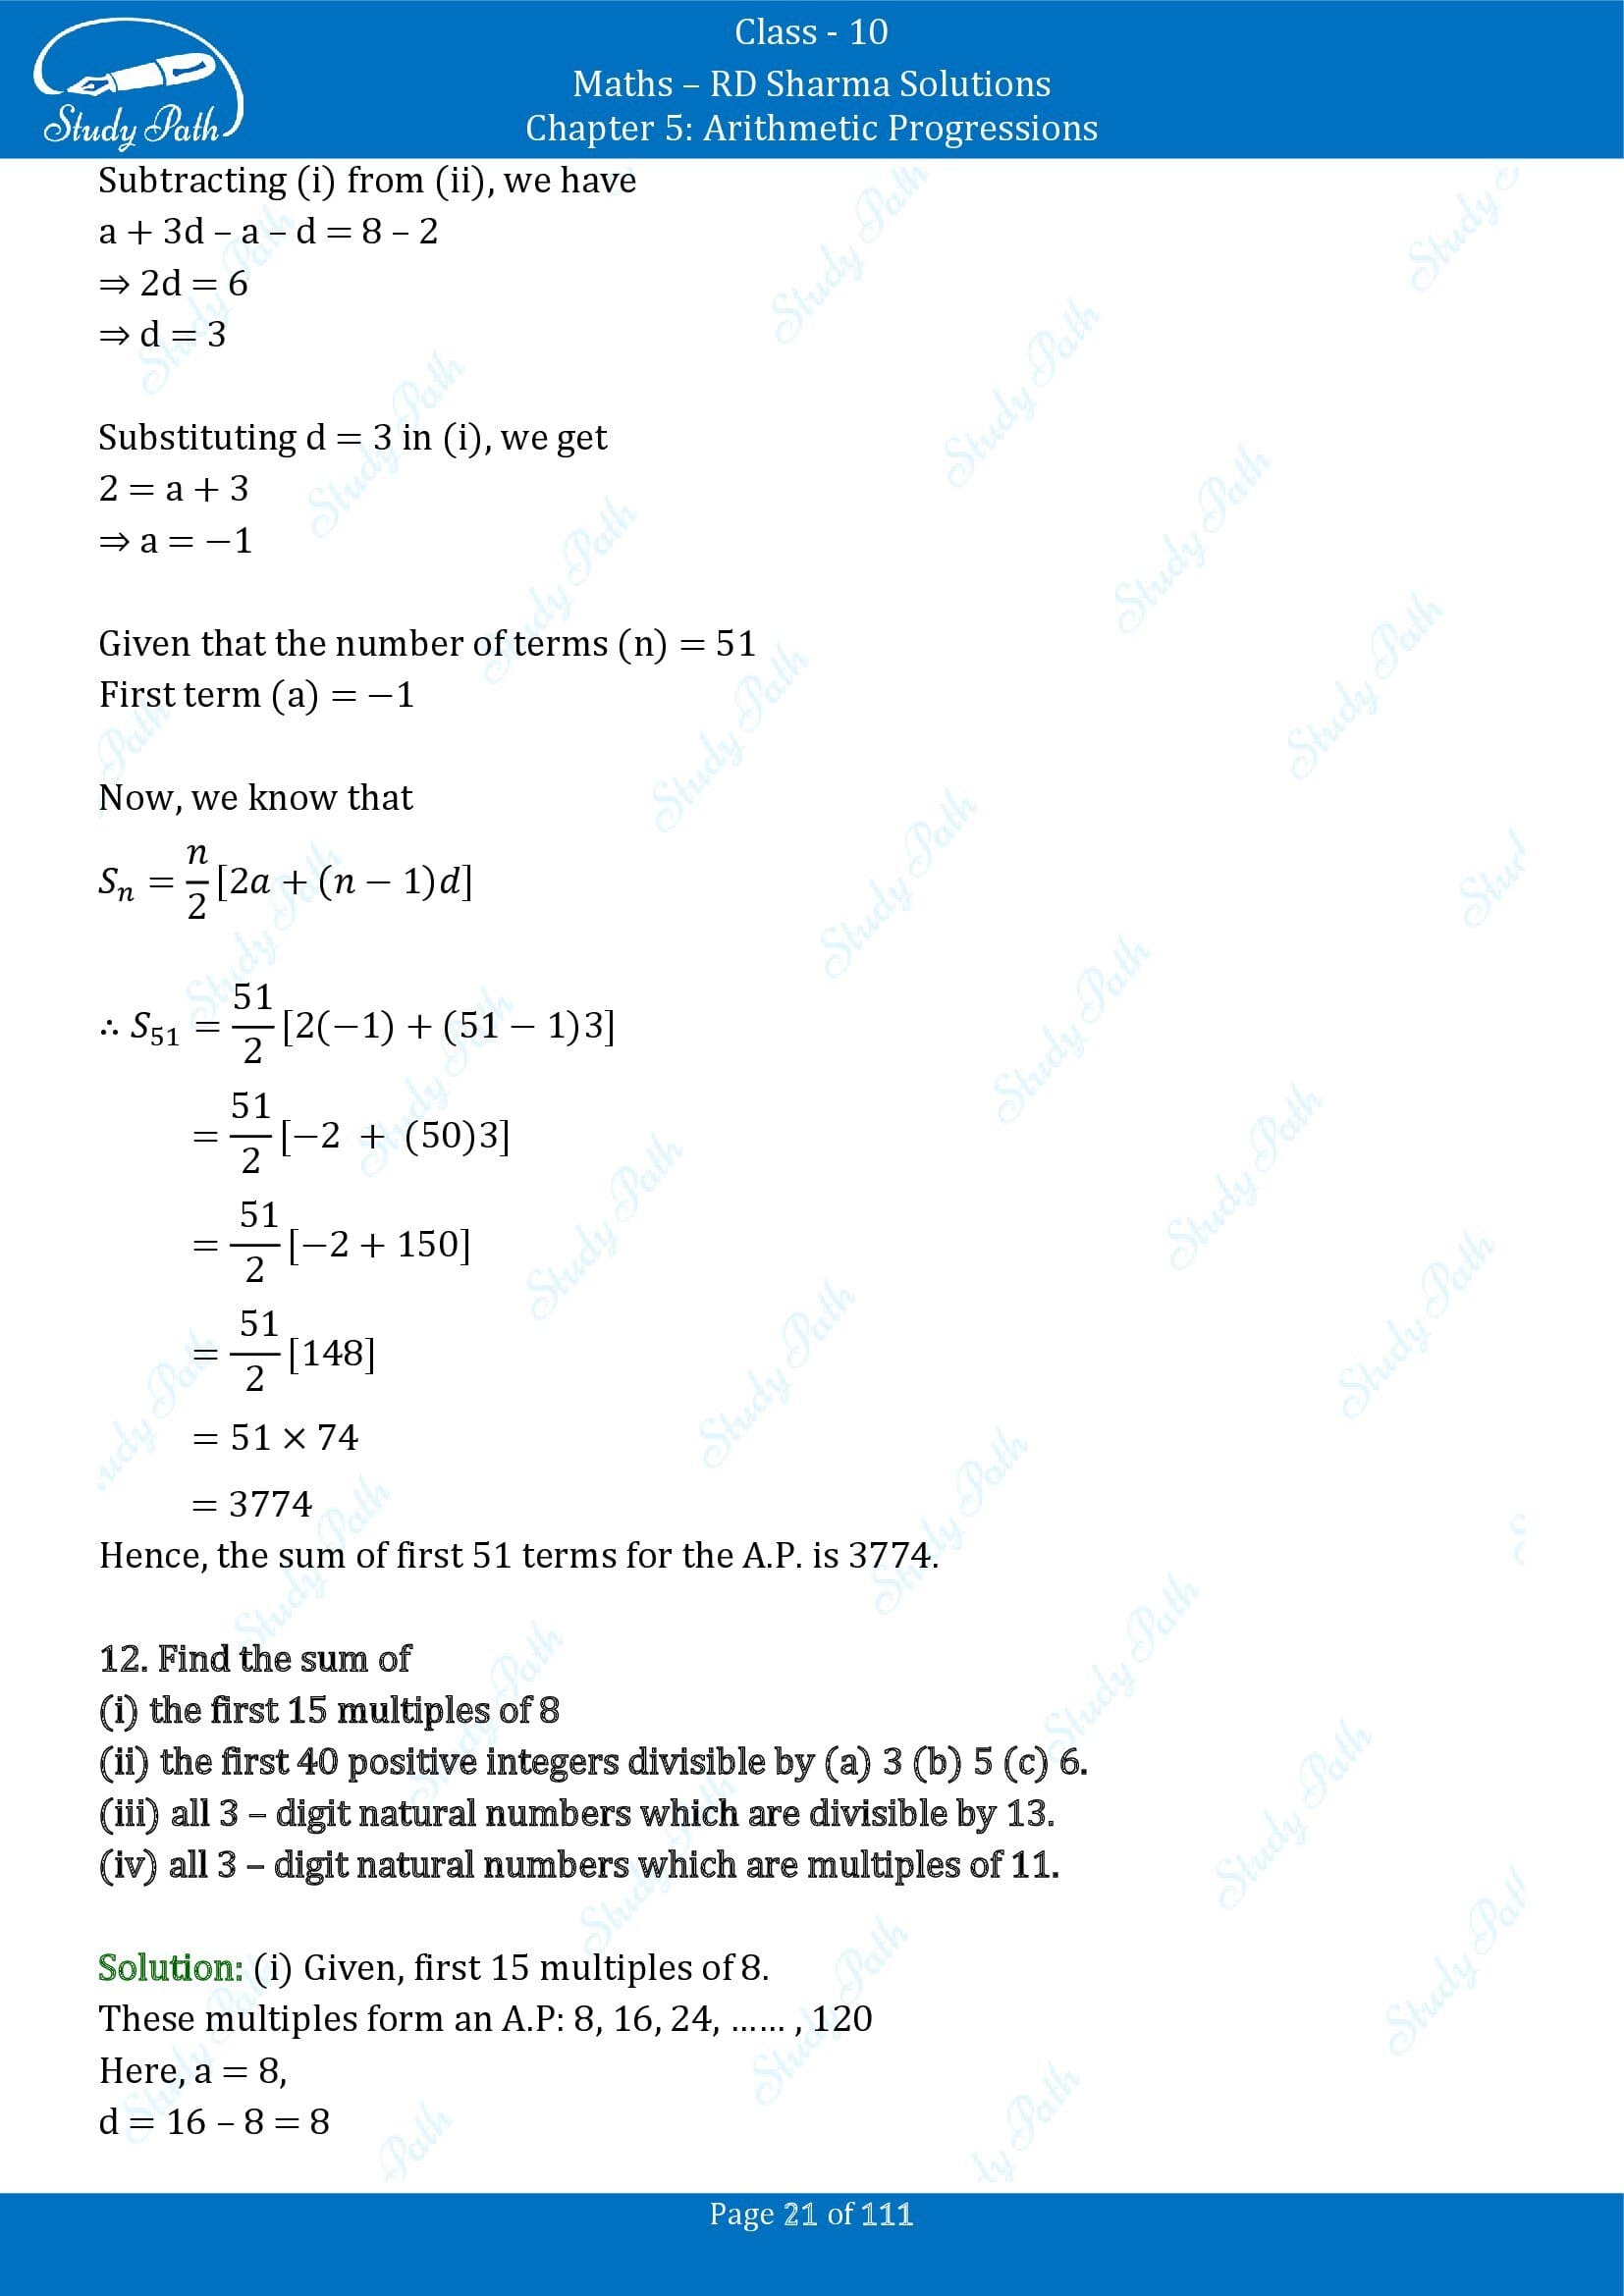 RD Sharma Solutions Class 10 Chapter 5 Arithmetic Progressions Exercise 5.6 00021